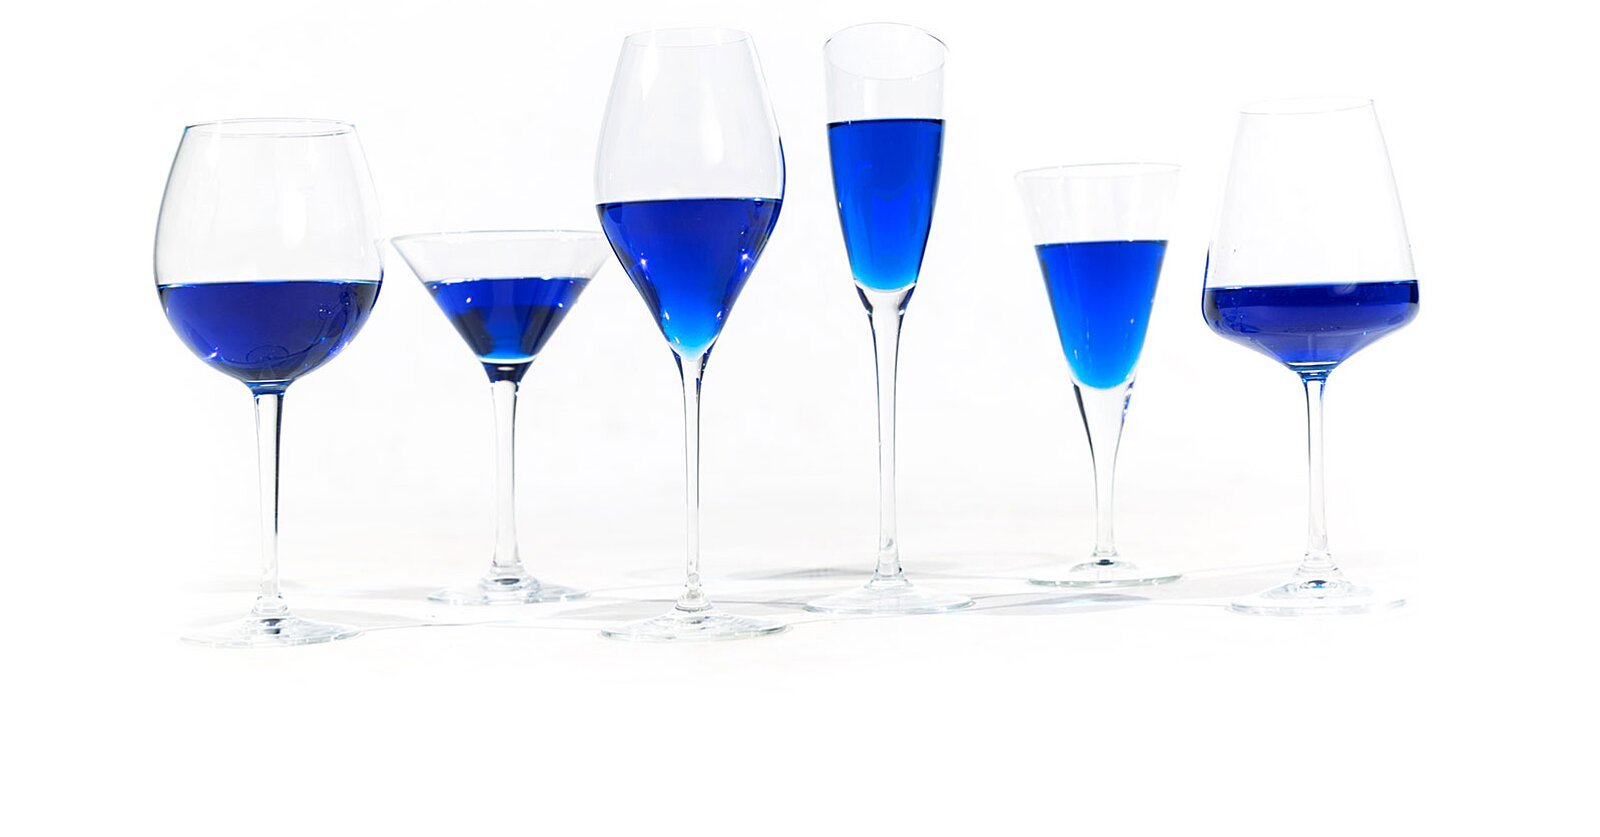 Where to Buy the Blue Wine Everyone is Talking About